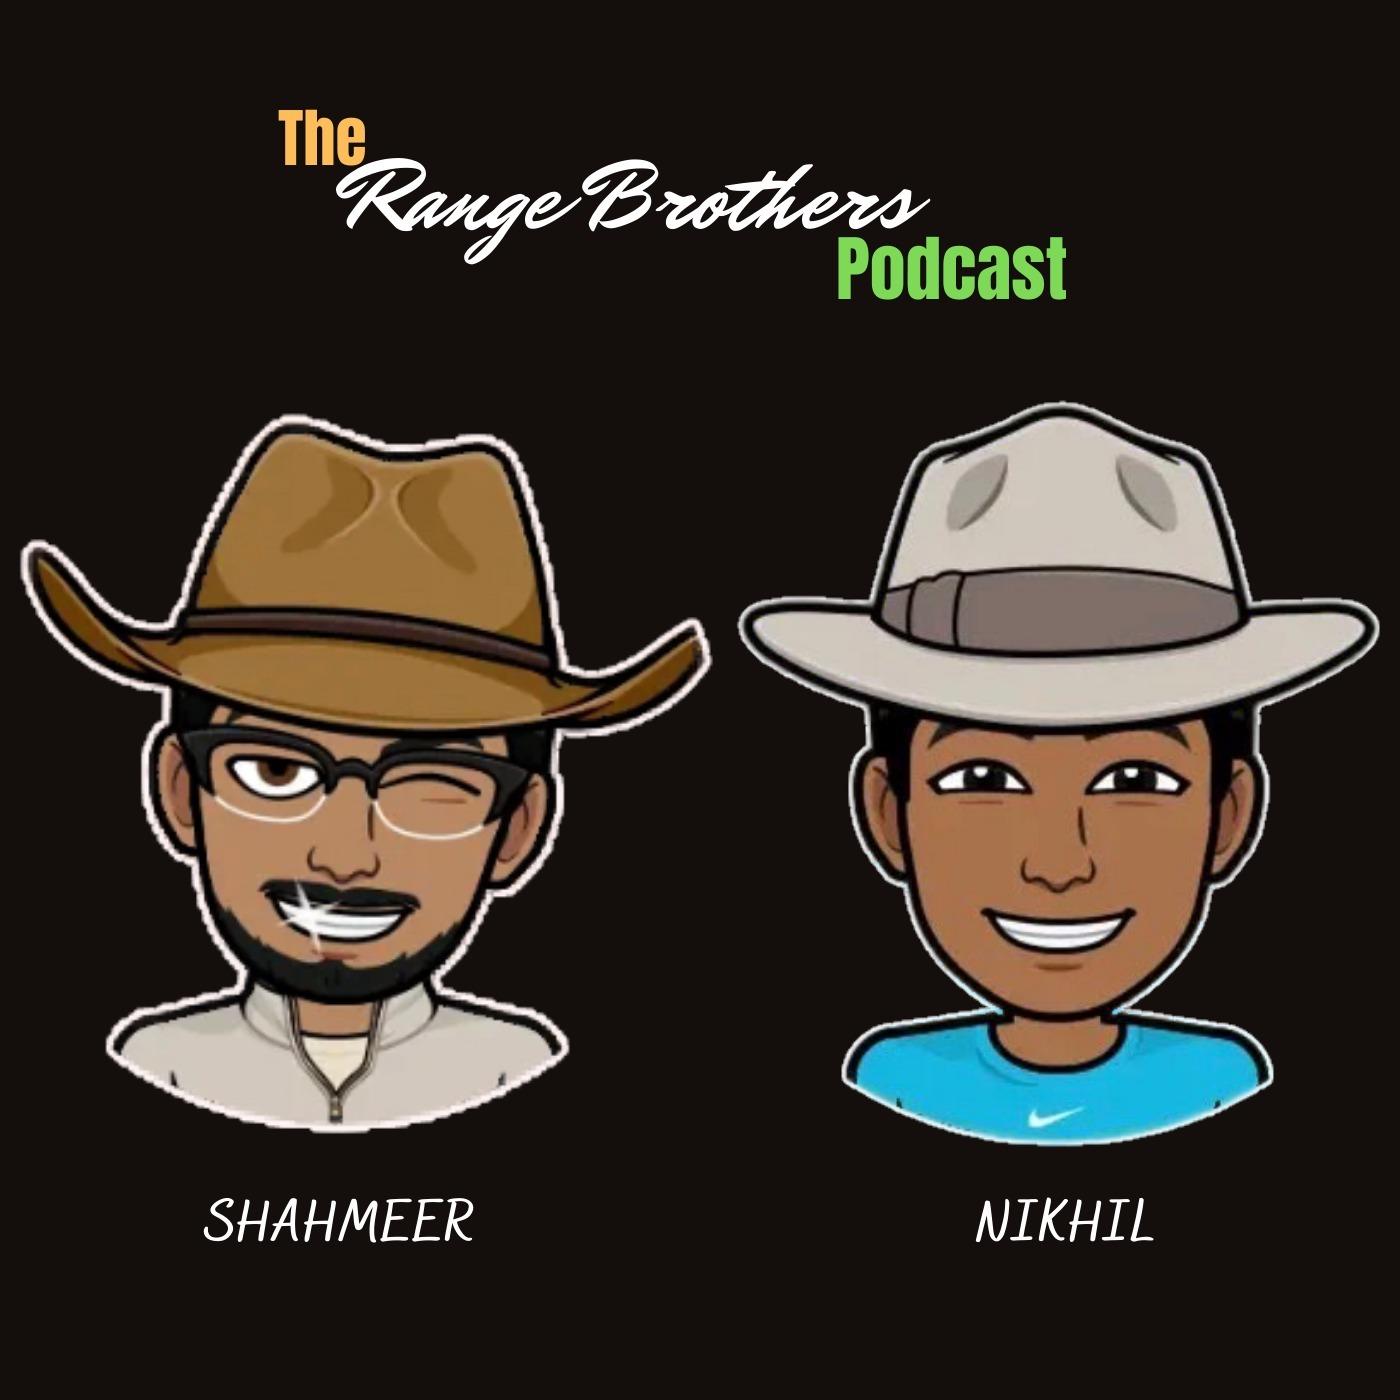 The Range Brothers Podcast